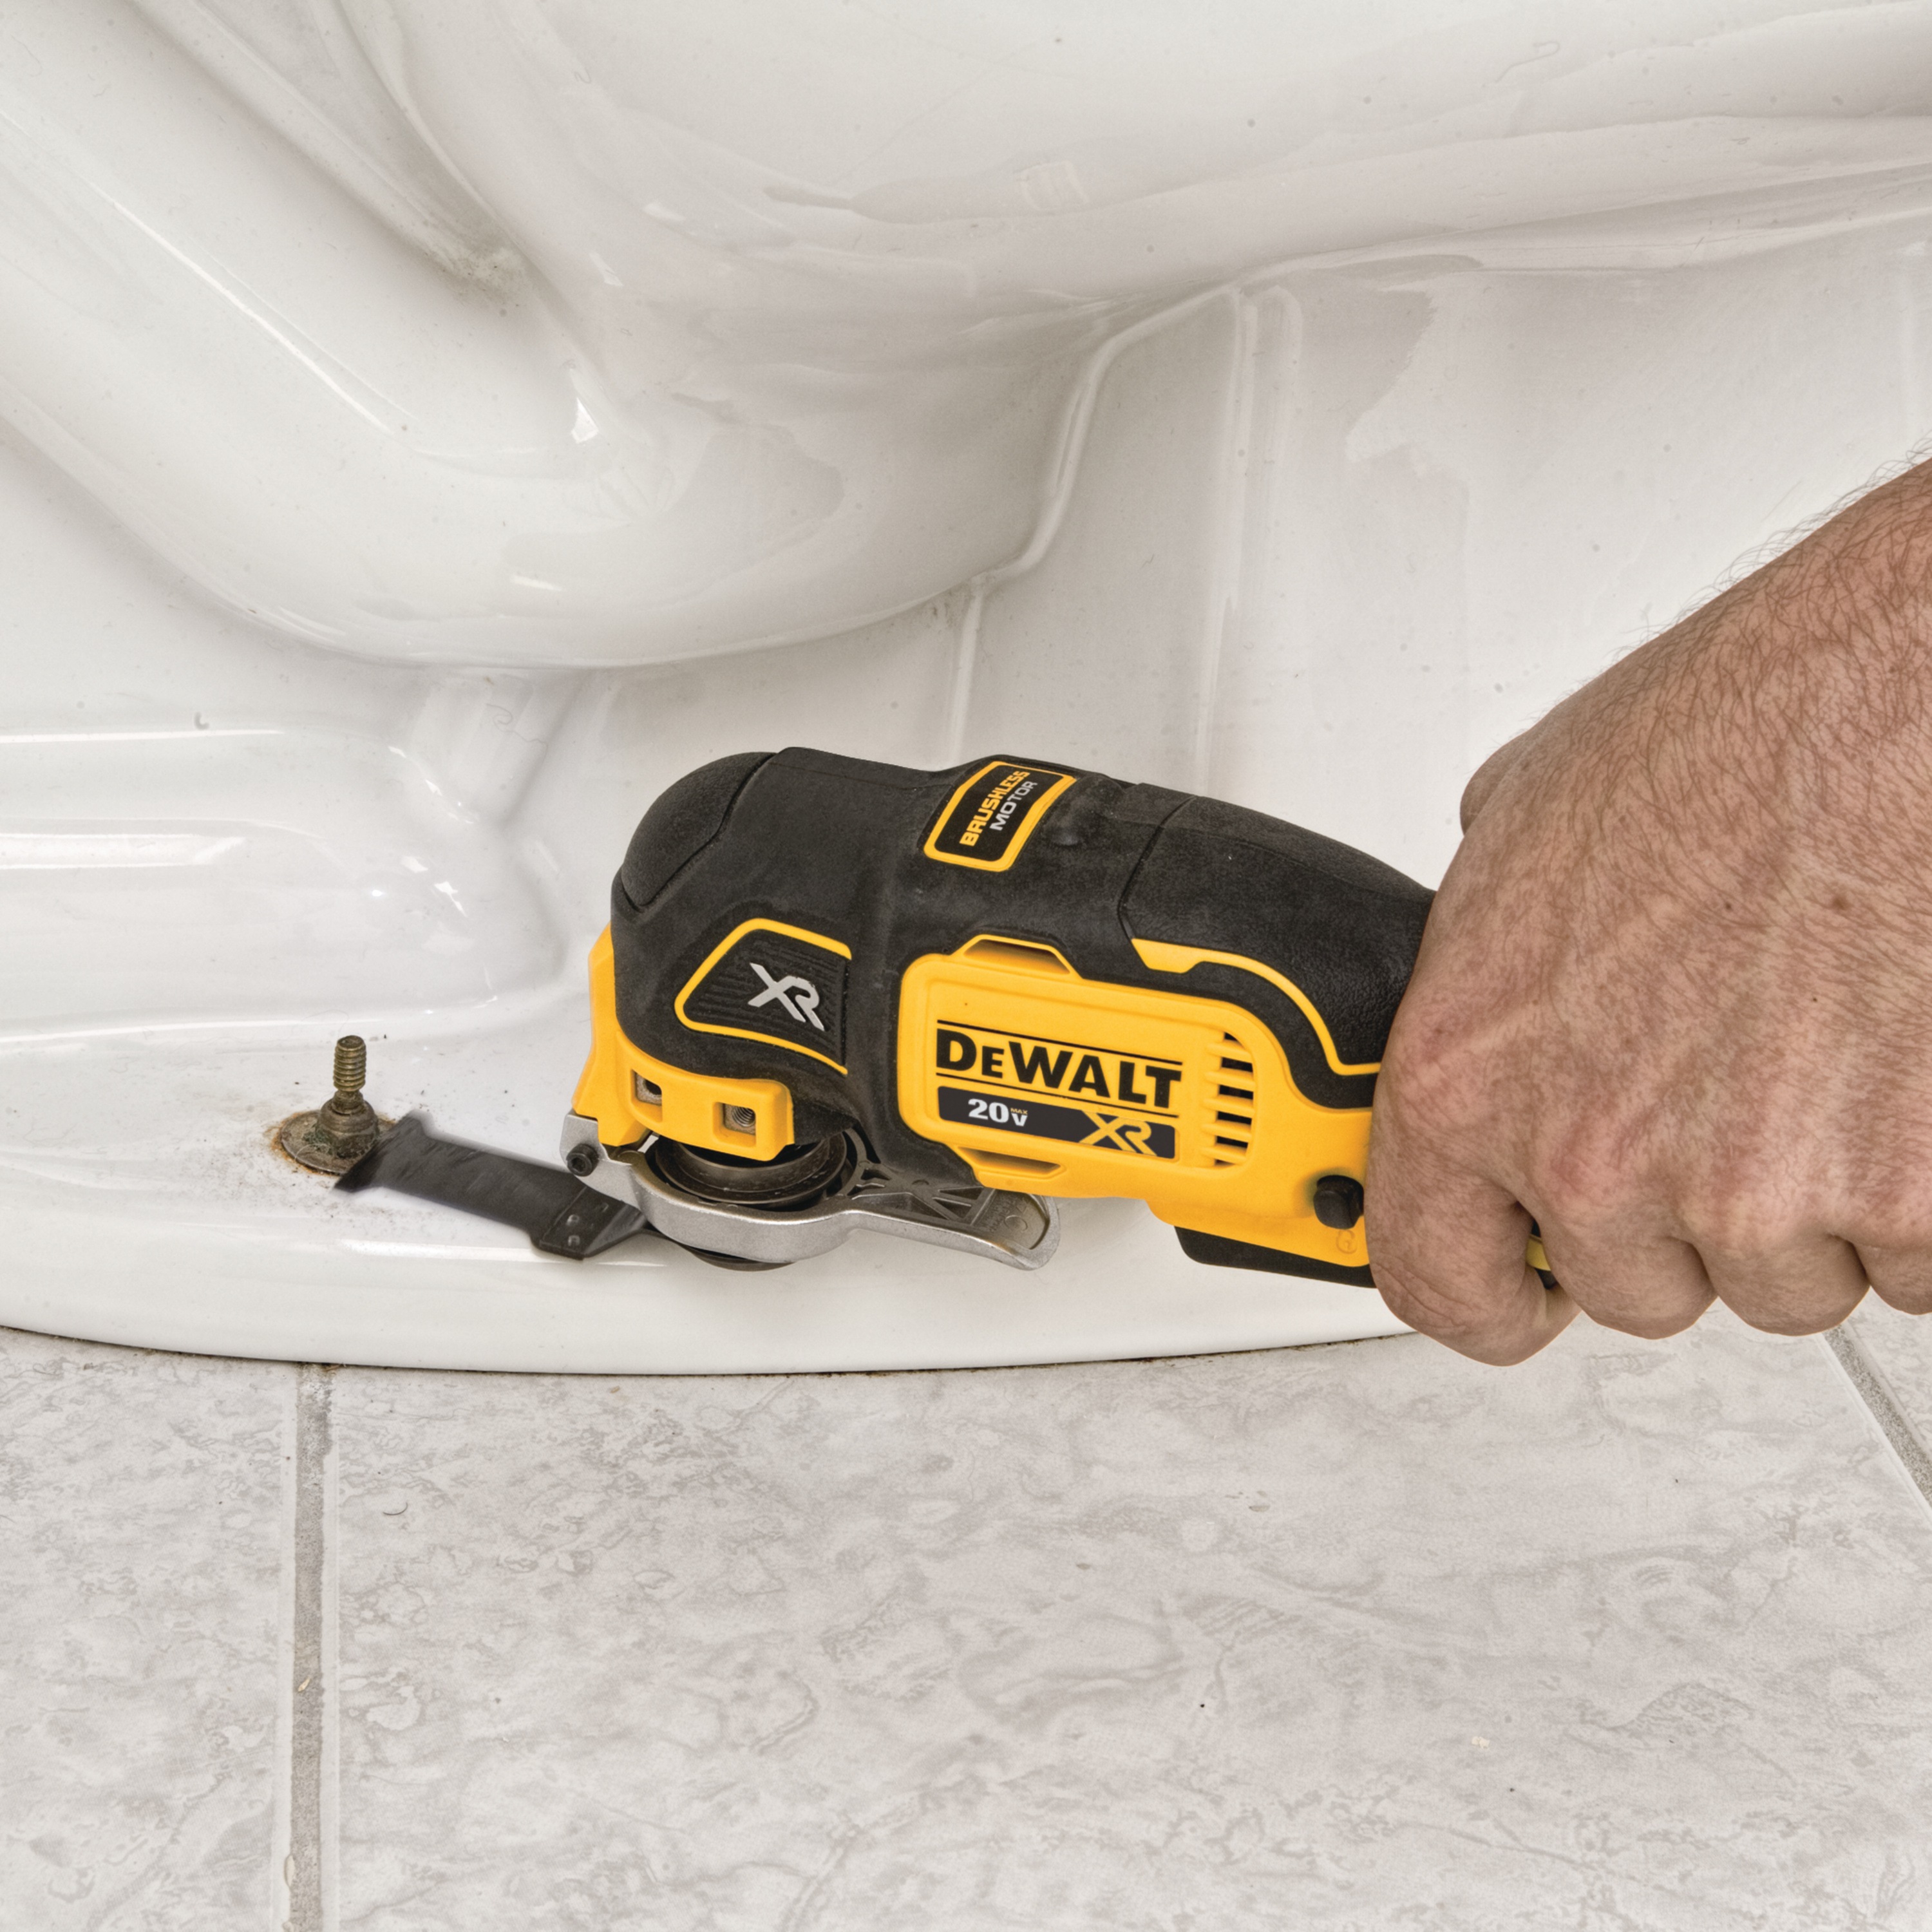 XR Cordless Oscillating Multi Tool being used to cut hardened bolt from toilet base